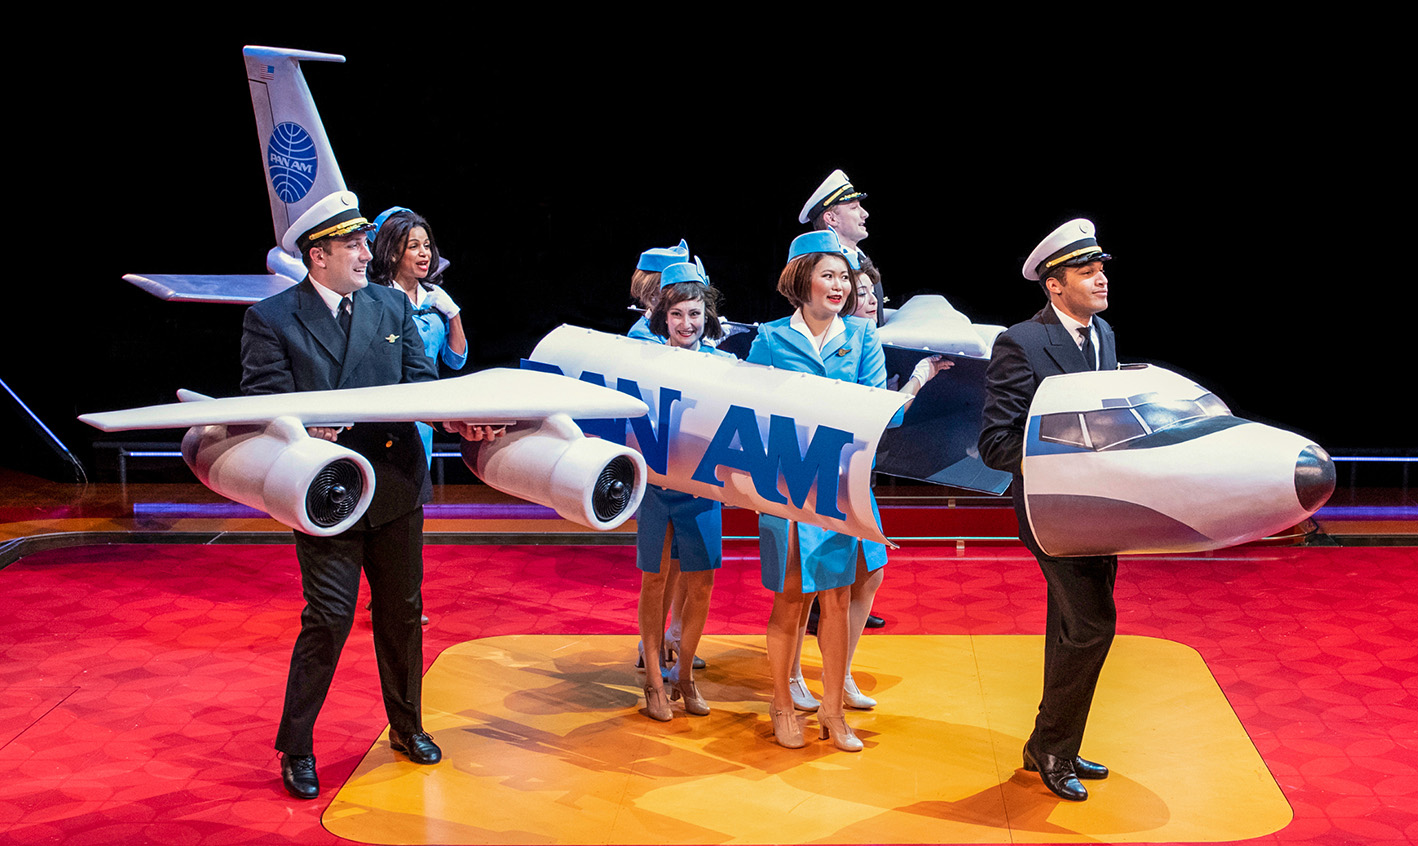 Christian Thompson (Frank Abagnale, Jr.) and the cast of Catch Me If You Can running March 4 through April 17 at Arena Stage at the Mead Center for American Theater. Photo by Margot Schulman.